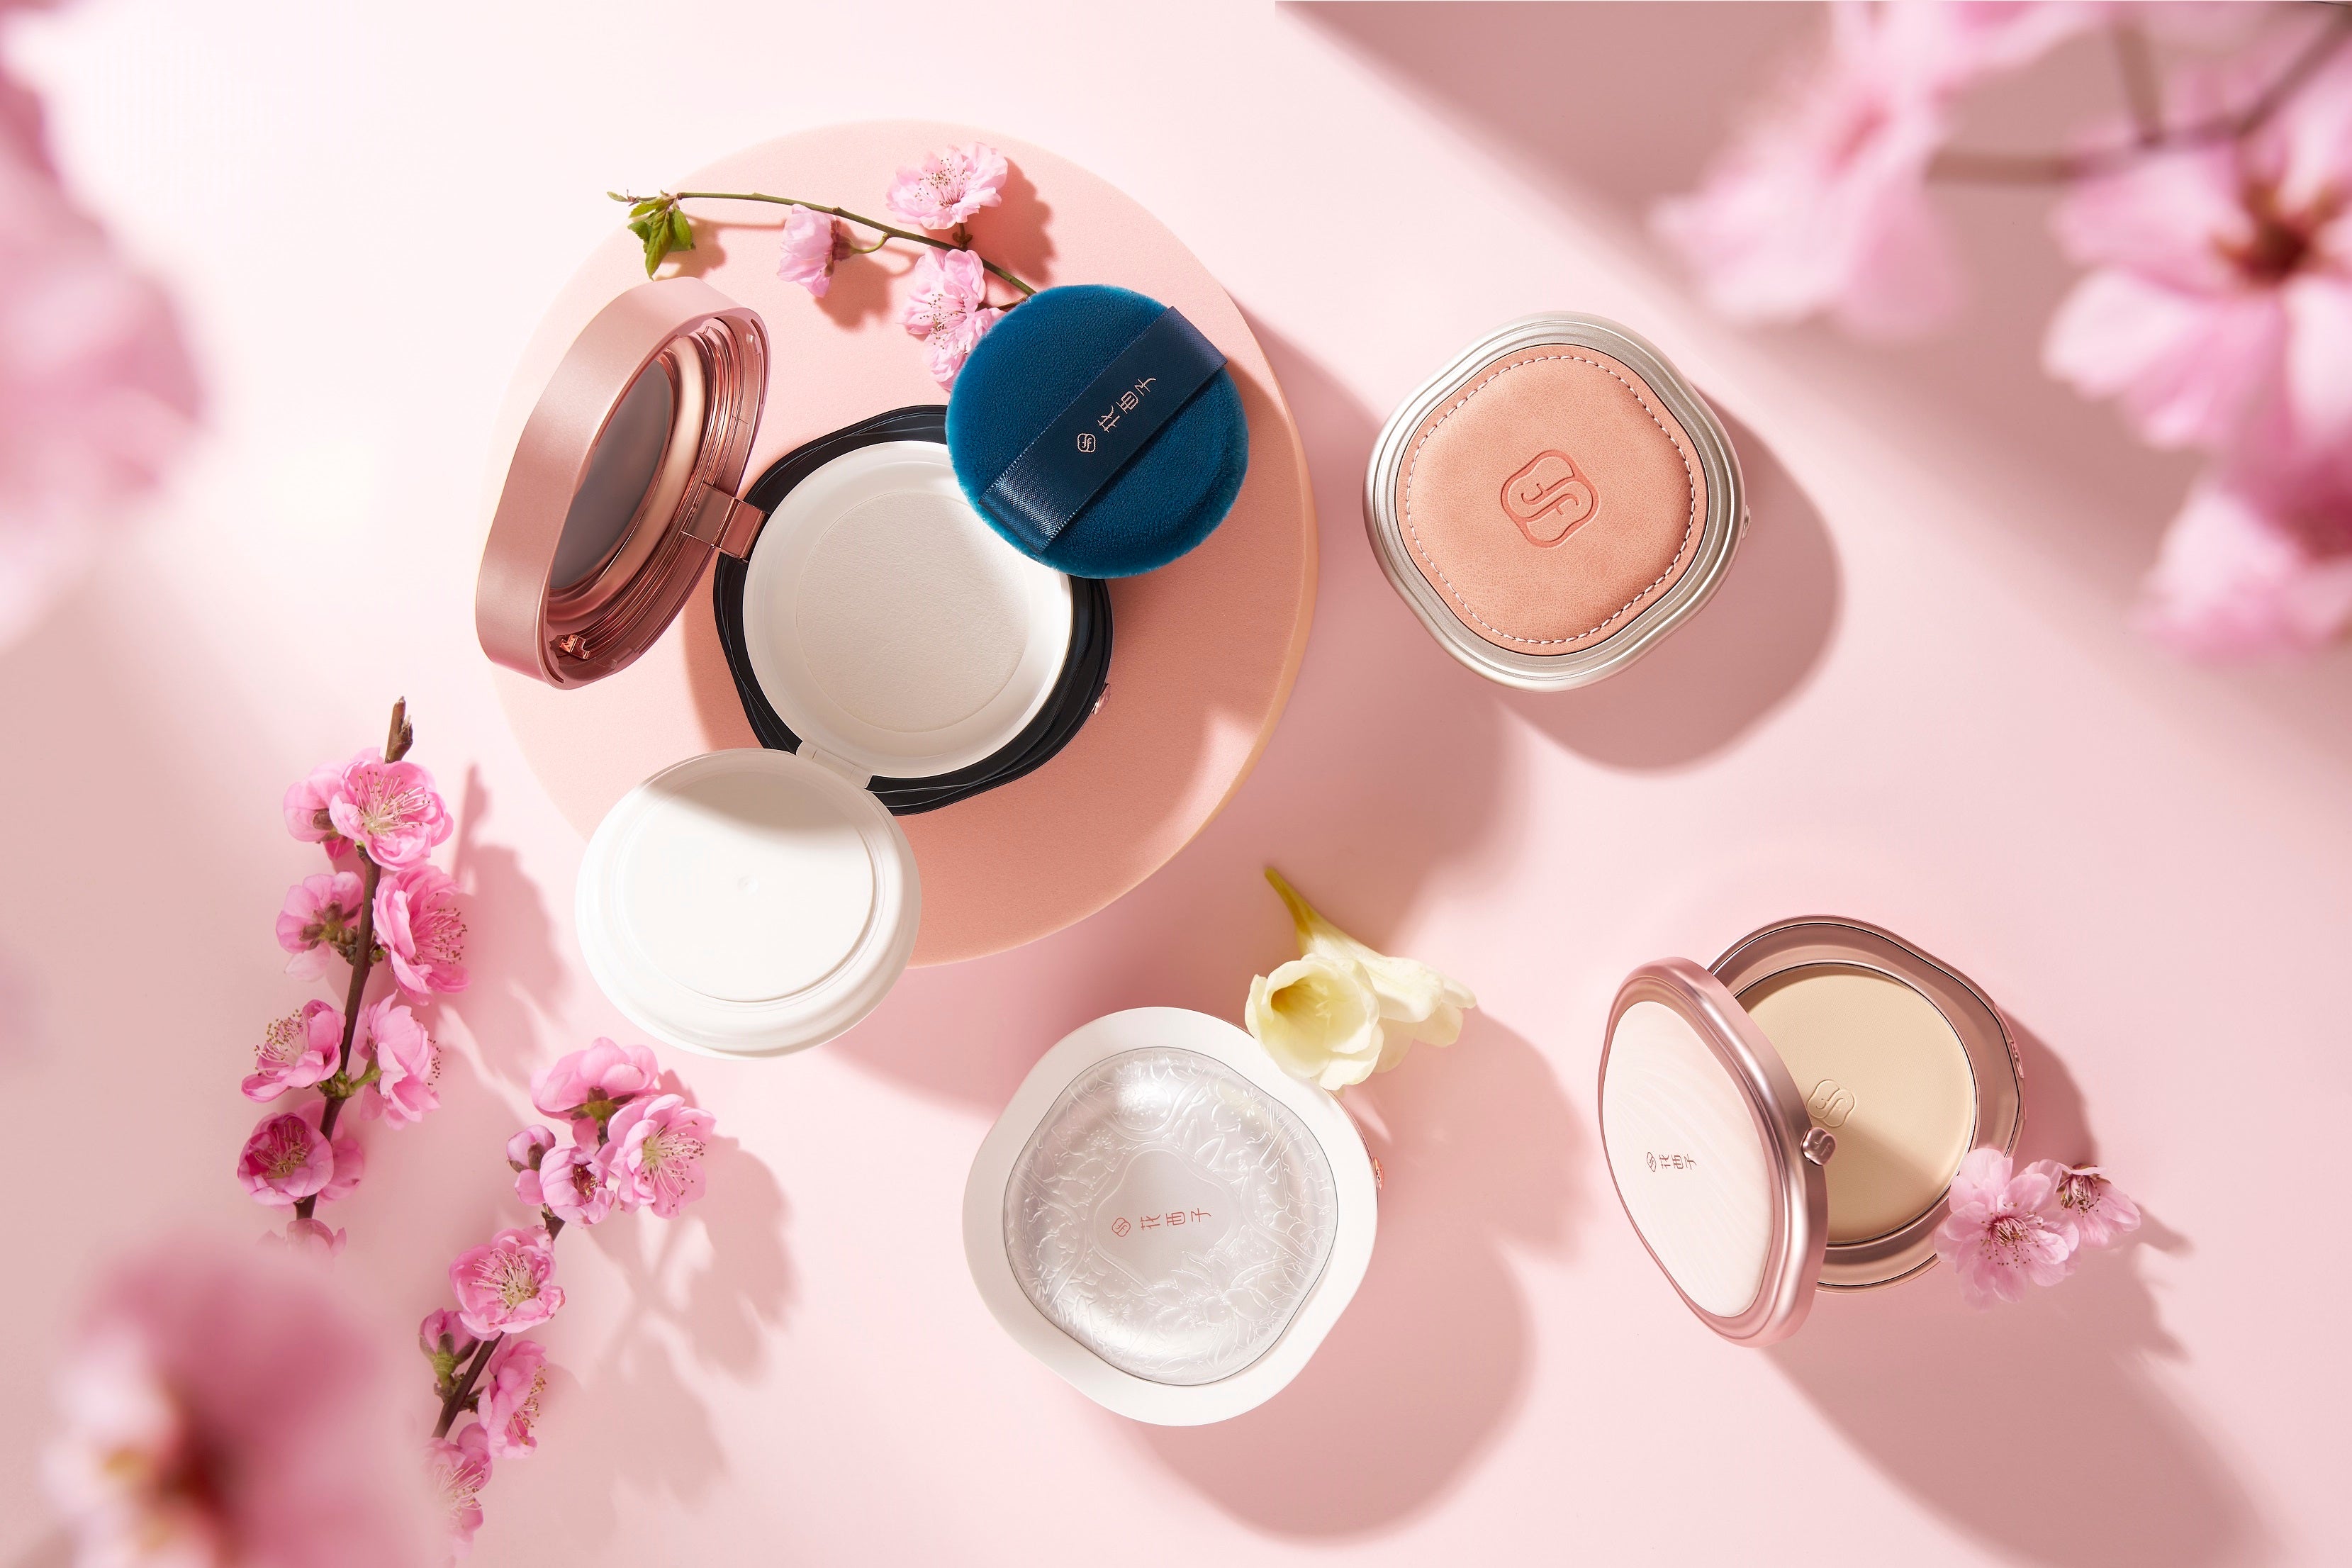 C-BEAUTY LEADER FLORASIS SETS SIGHT ON GLOBAL EXPANSION WITH SAMARITAINE